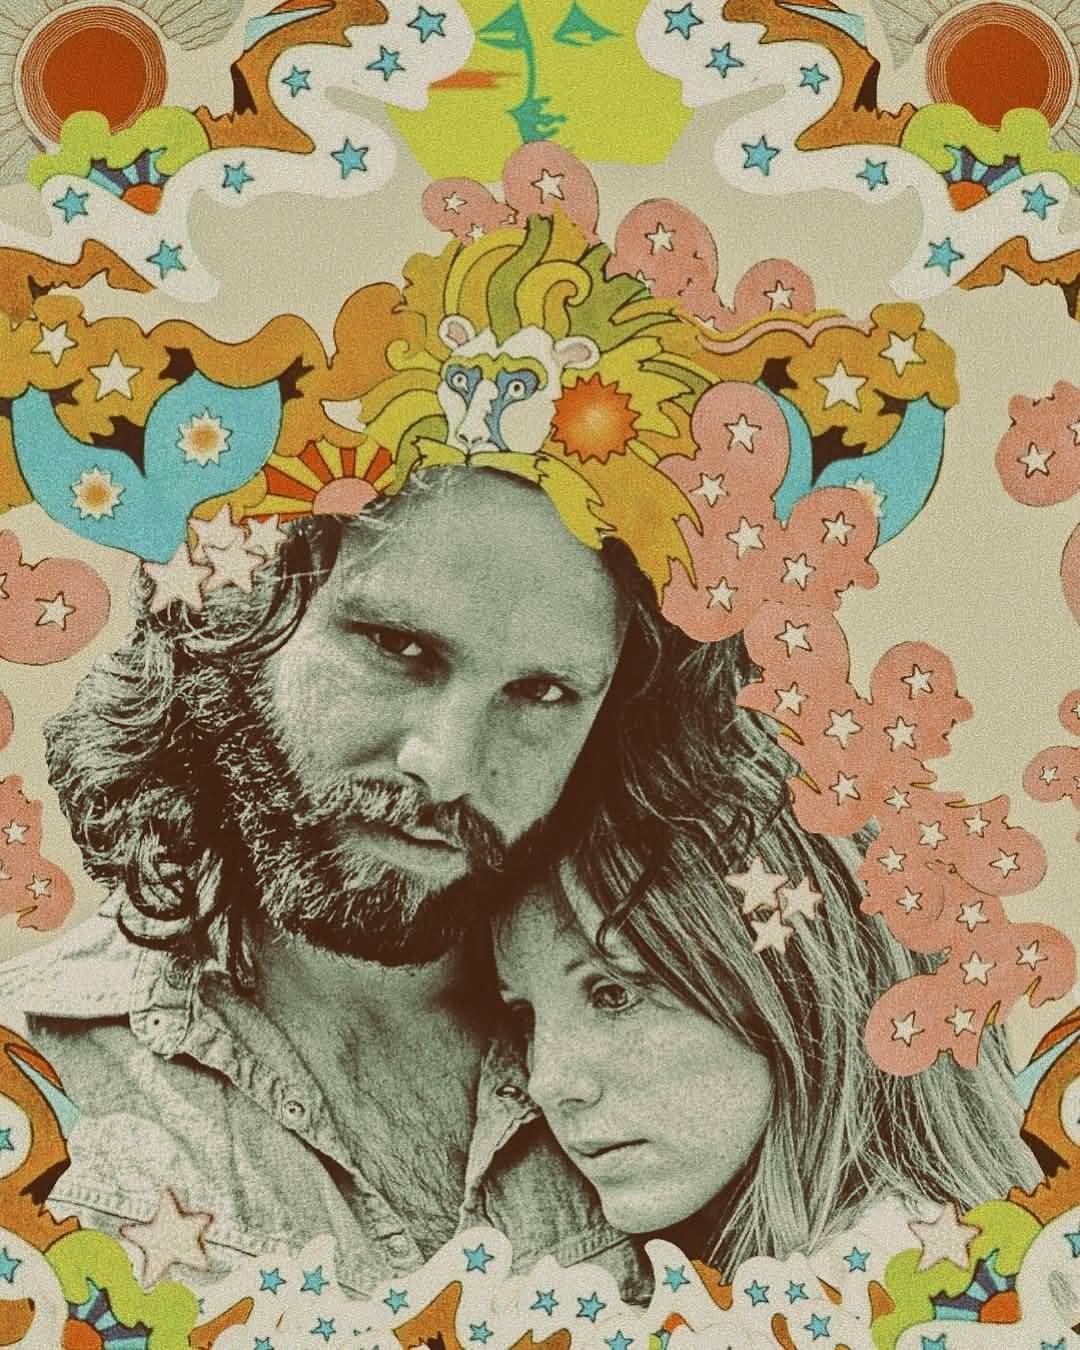 Some Rare Pictures Of Jim Morrison with Girlfriend Pamela Courson 22